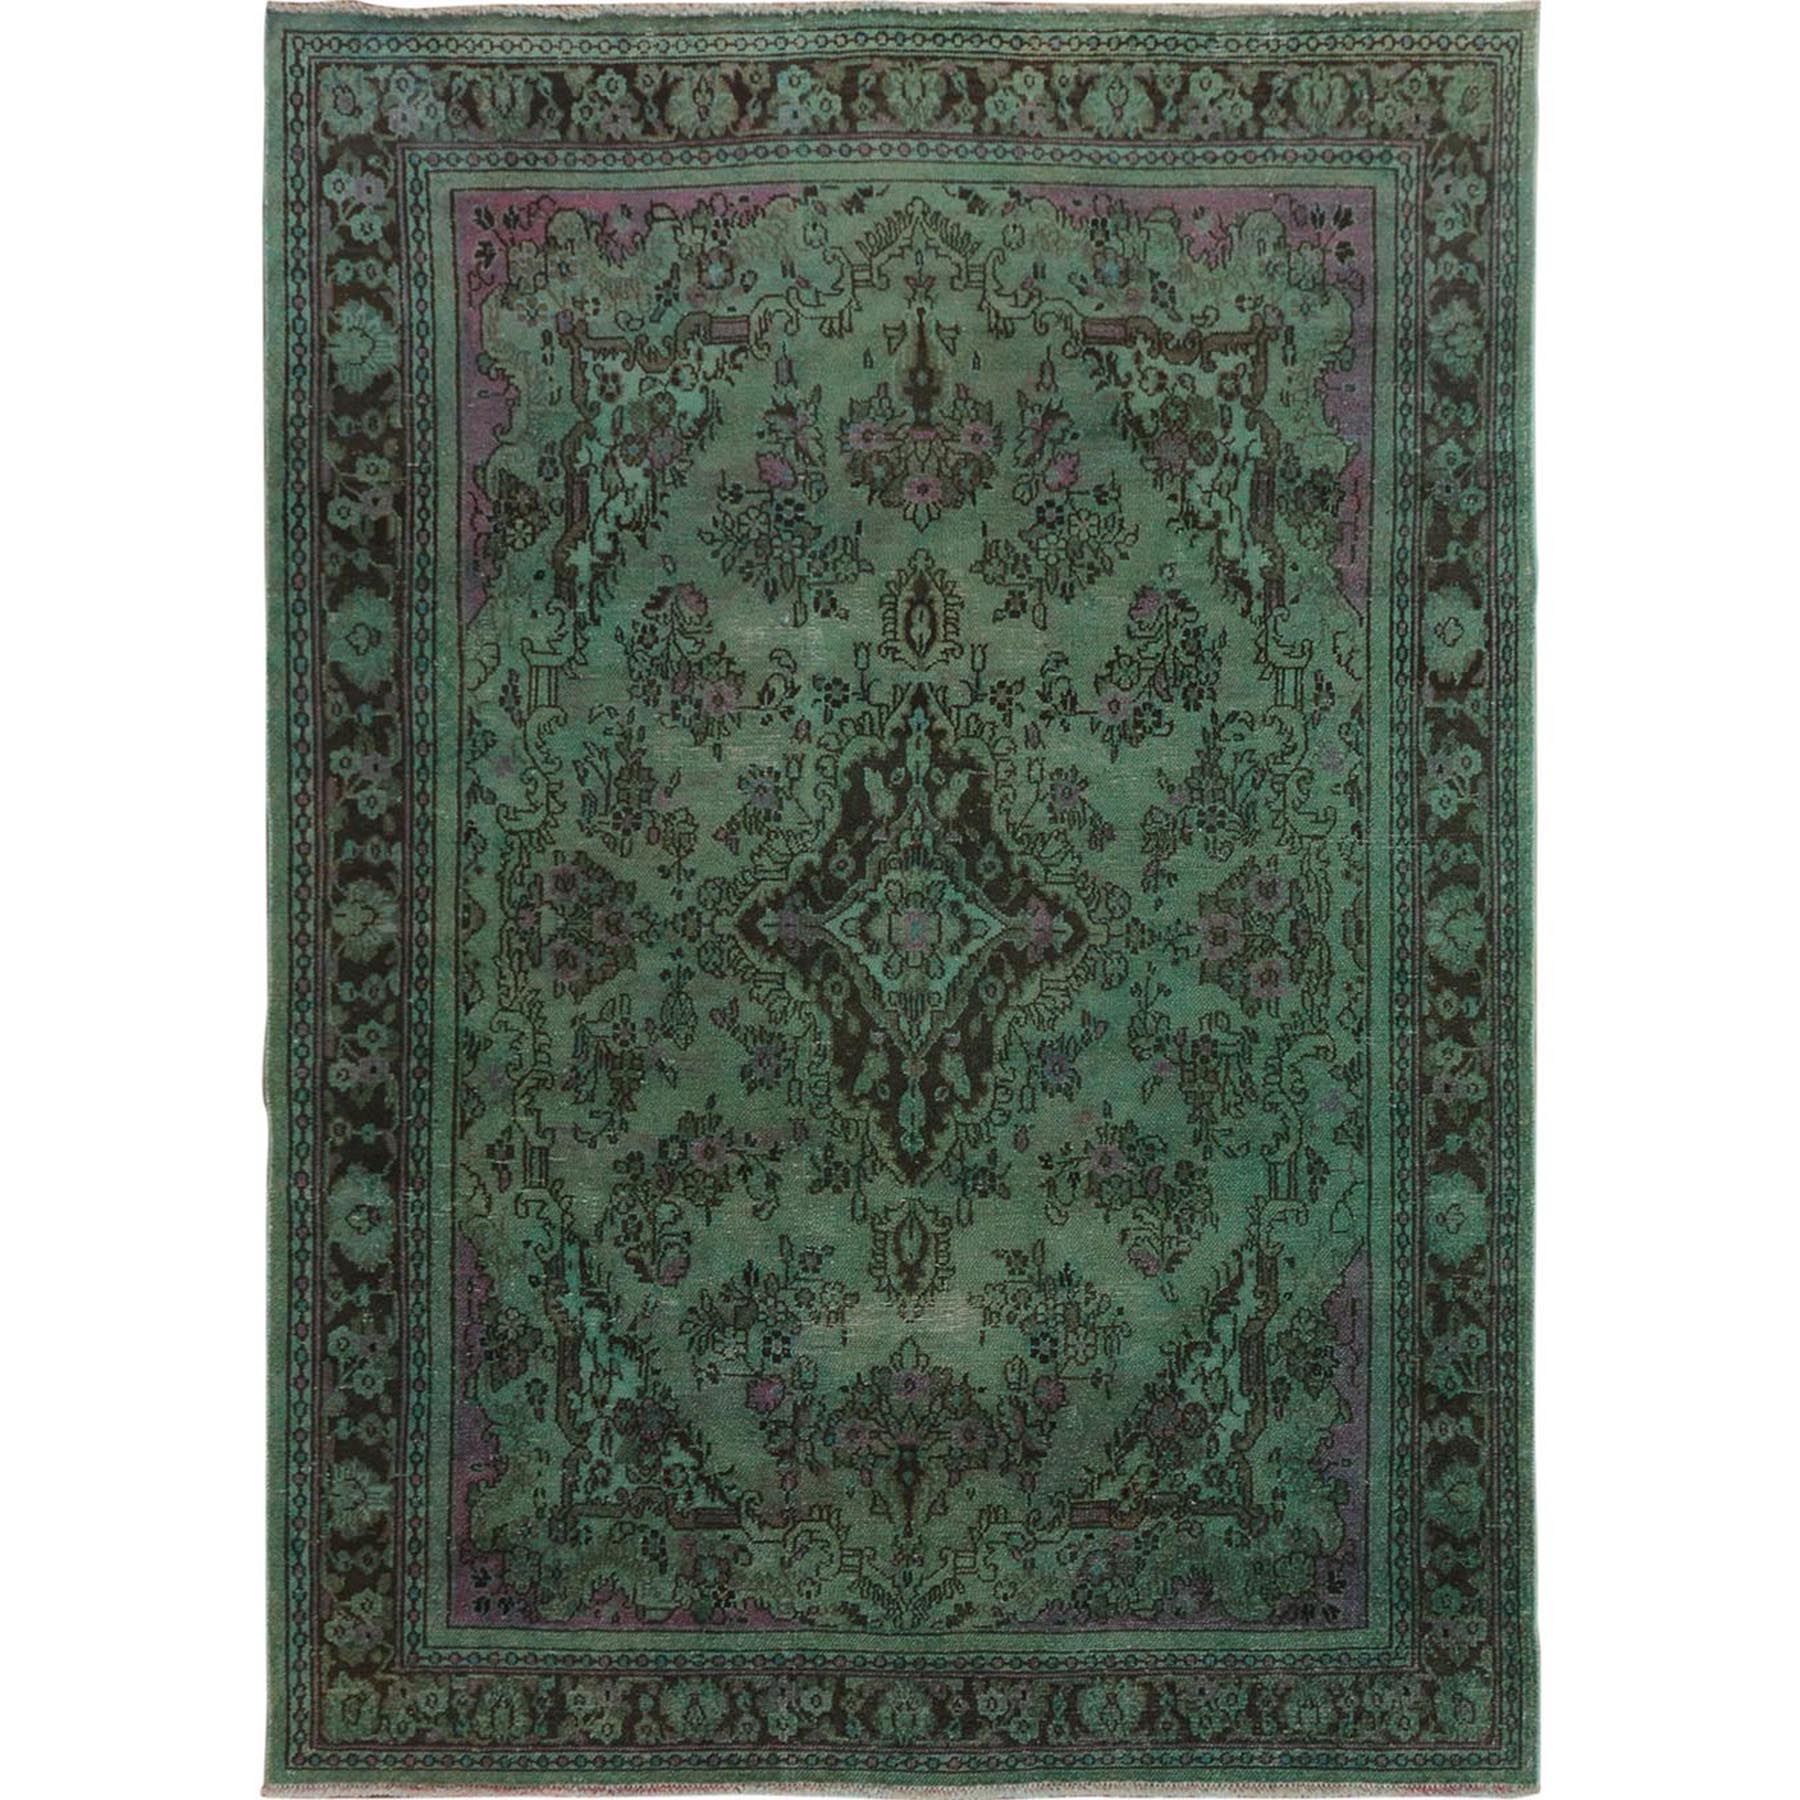 6'8"X9'9" Green Overdyed Vintage Bibikabad Persian Worn Down Hand Knotted Oriental Rug moae7ce8